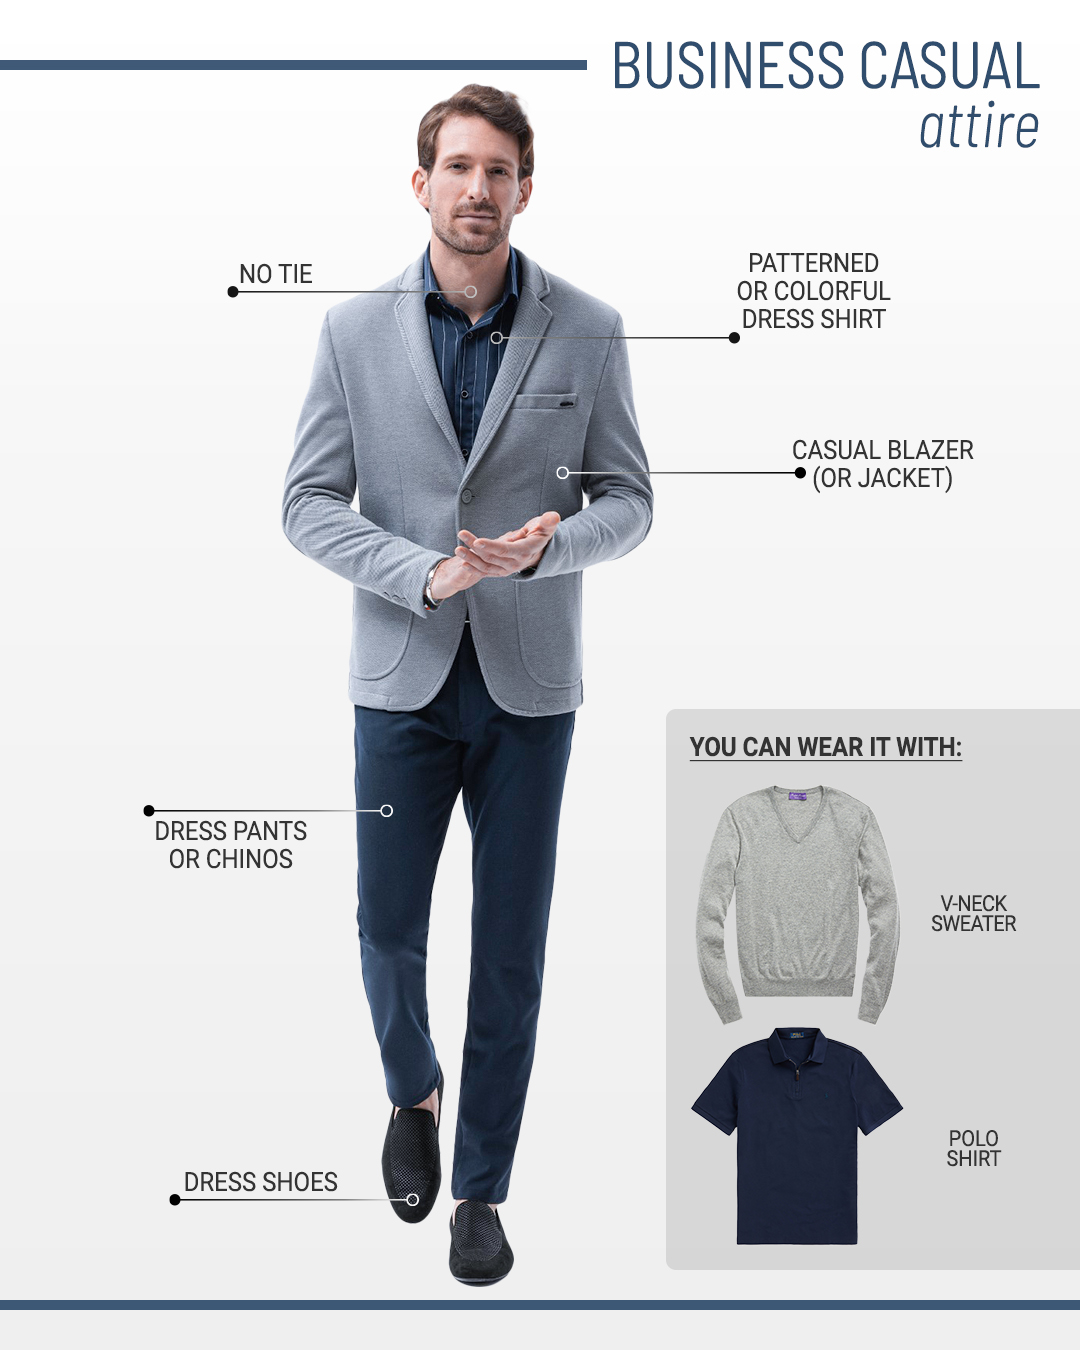 Business casual dress code and attire for men